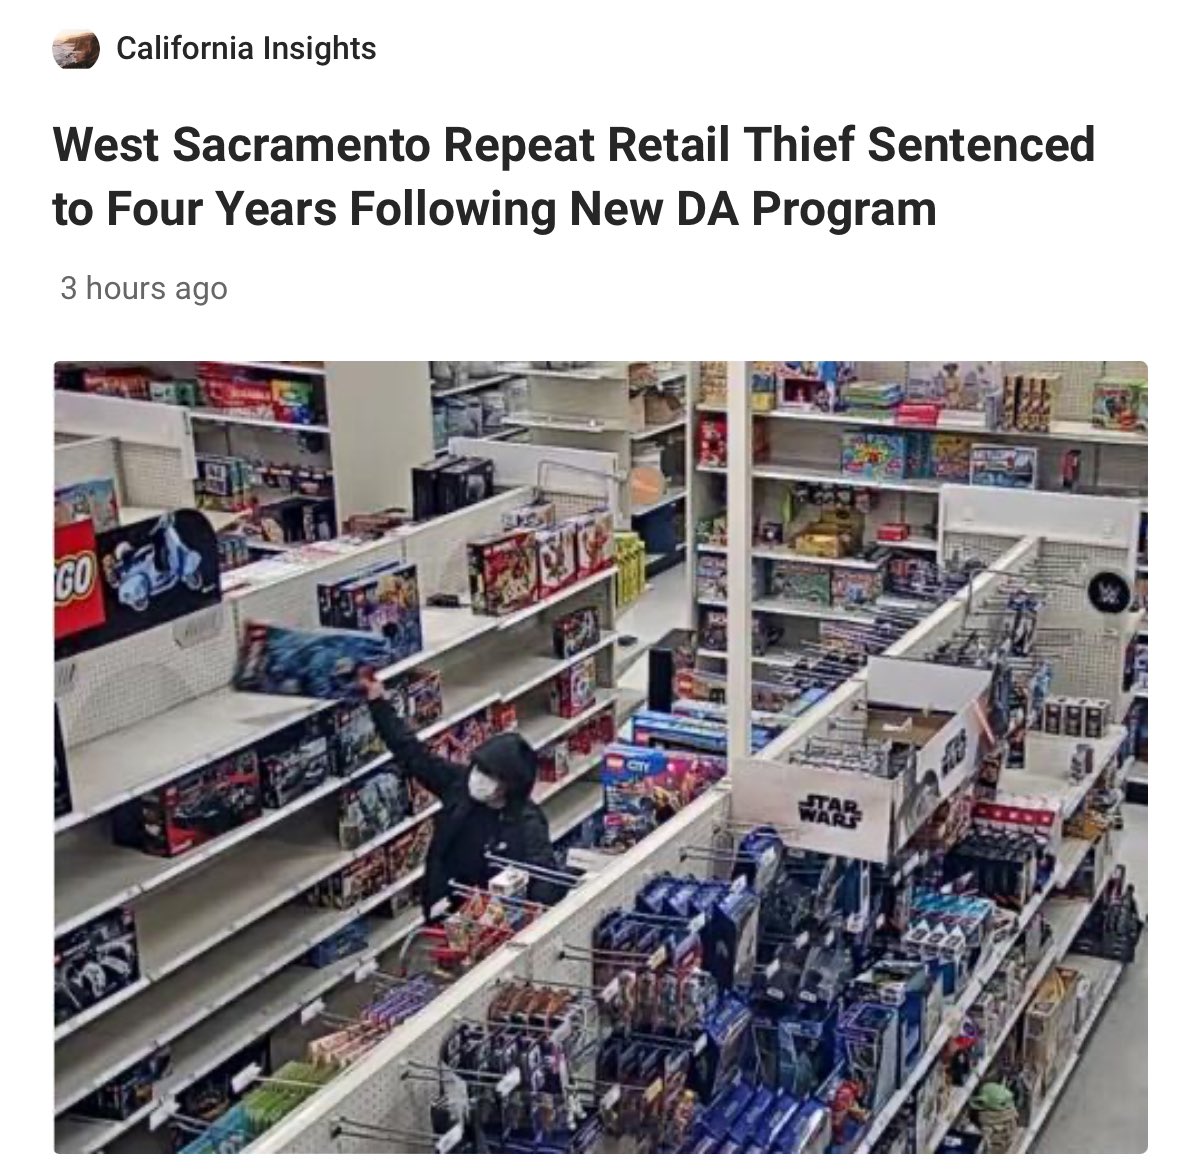 Two things are true about the retail theft crisis in CA. 1) Too many thieves steal with brazen impunity because of weak state laws (Prop 47) that fail to deter recidivists through enhanced consequences; 2) Enhanced collaboration between retailers and DAs directly can help